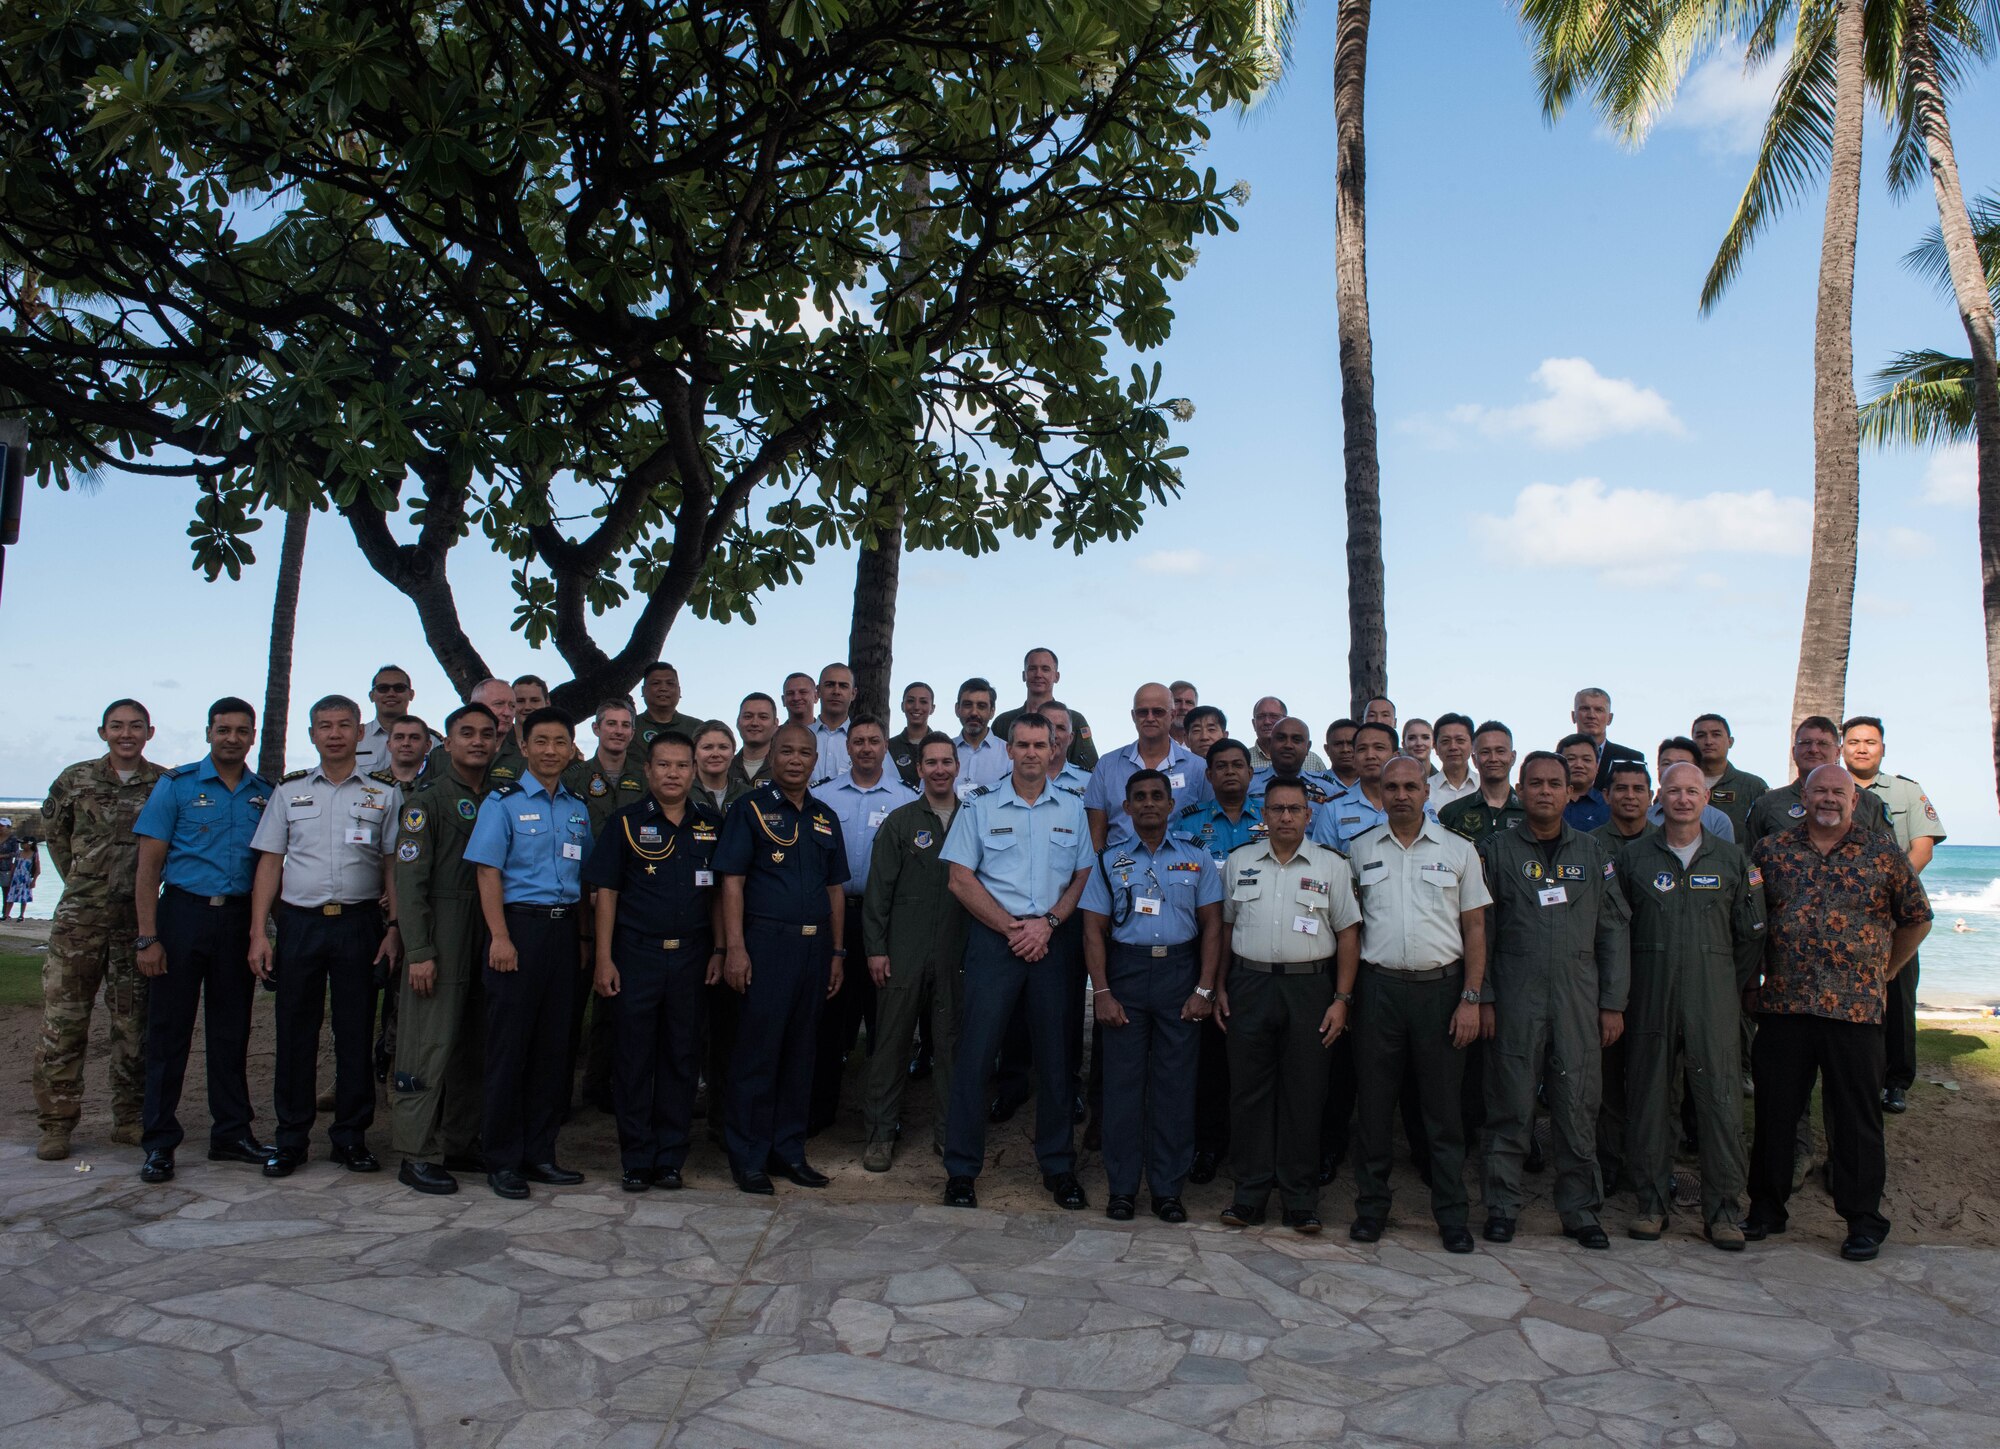 Attendees at the Indo-Pacific Safety Air Forces Exchange take a group photo in Waikiki, Hawaii, Aug. 20, 2019.